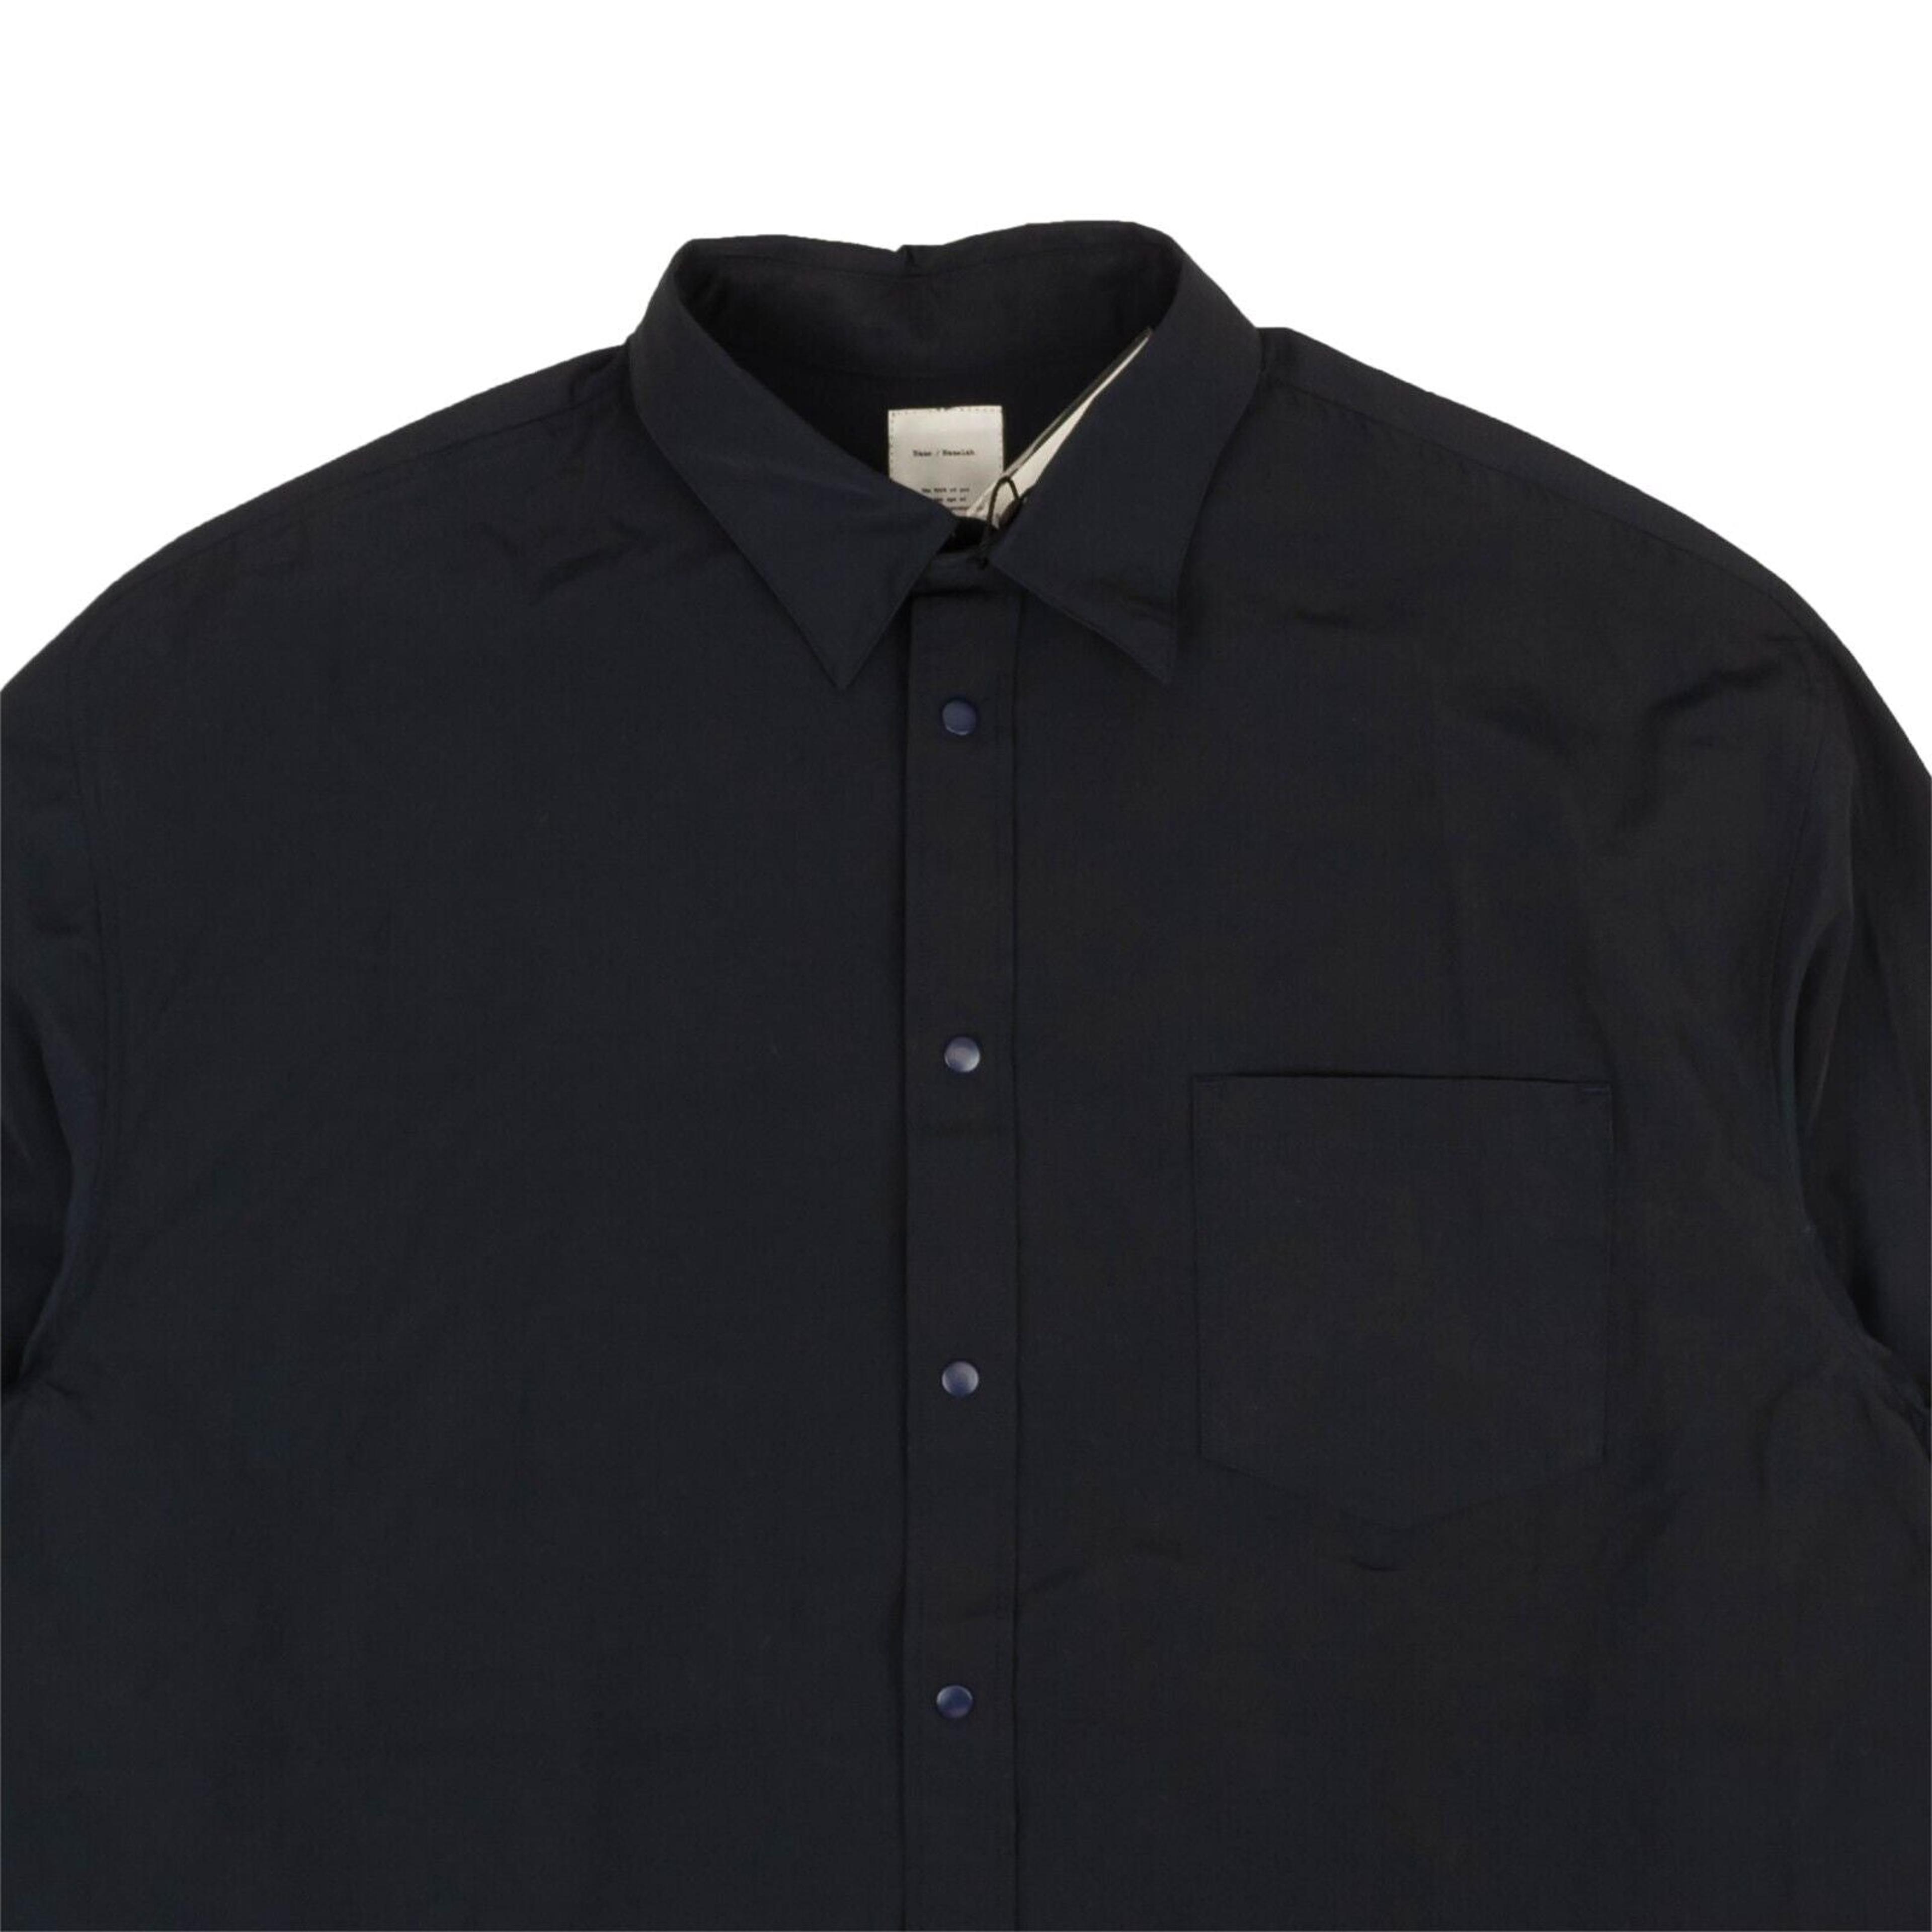 Alternate View 1 of Name Snap Front Overshirt - Blue